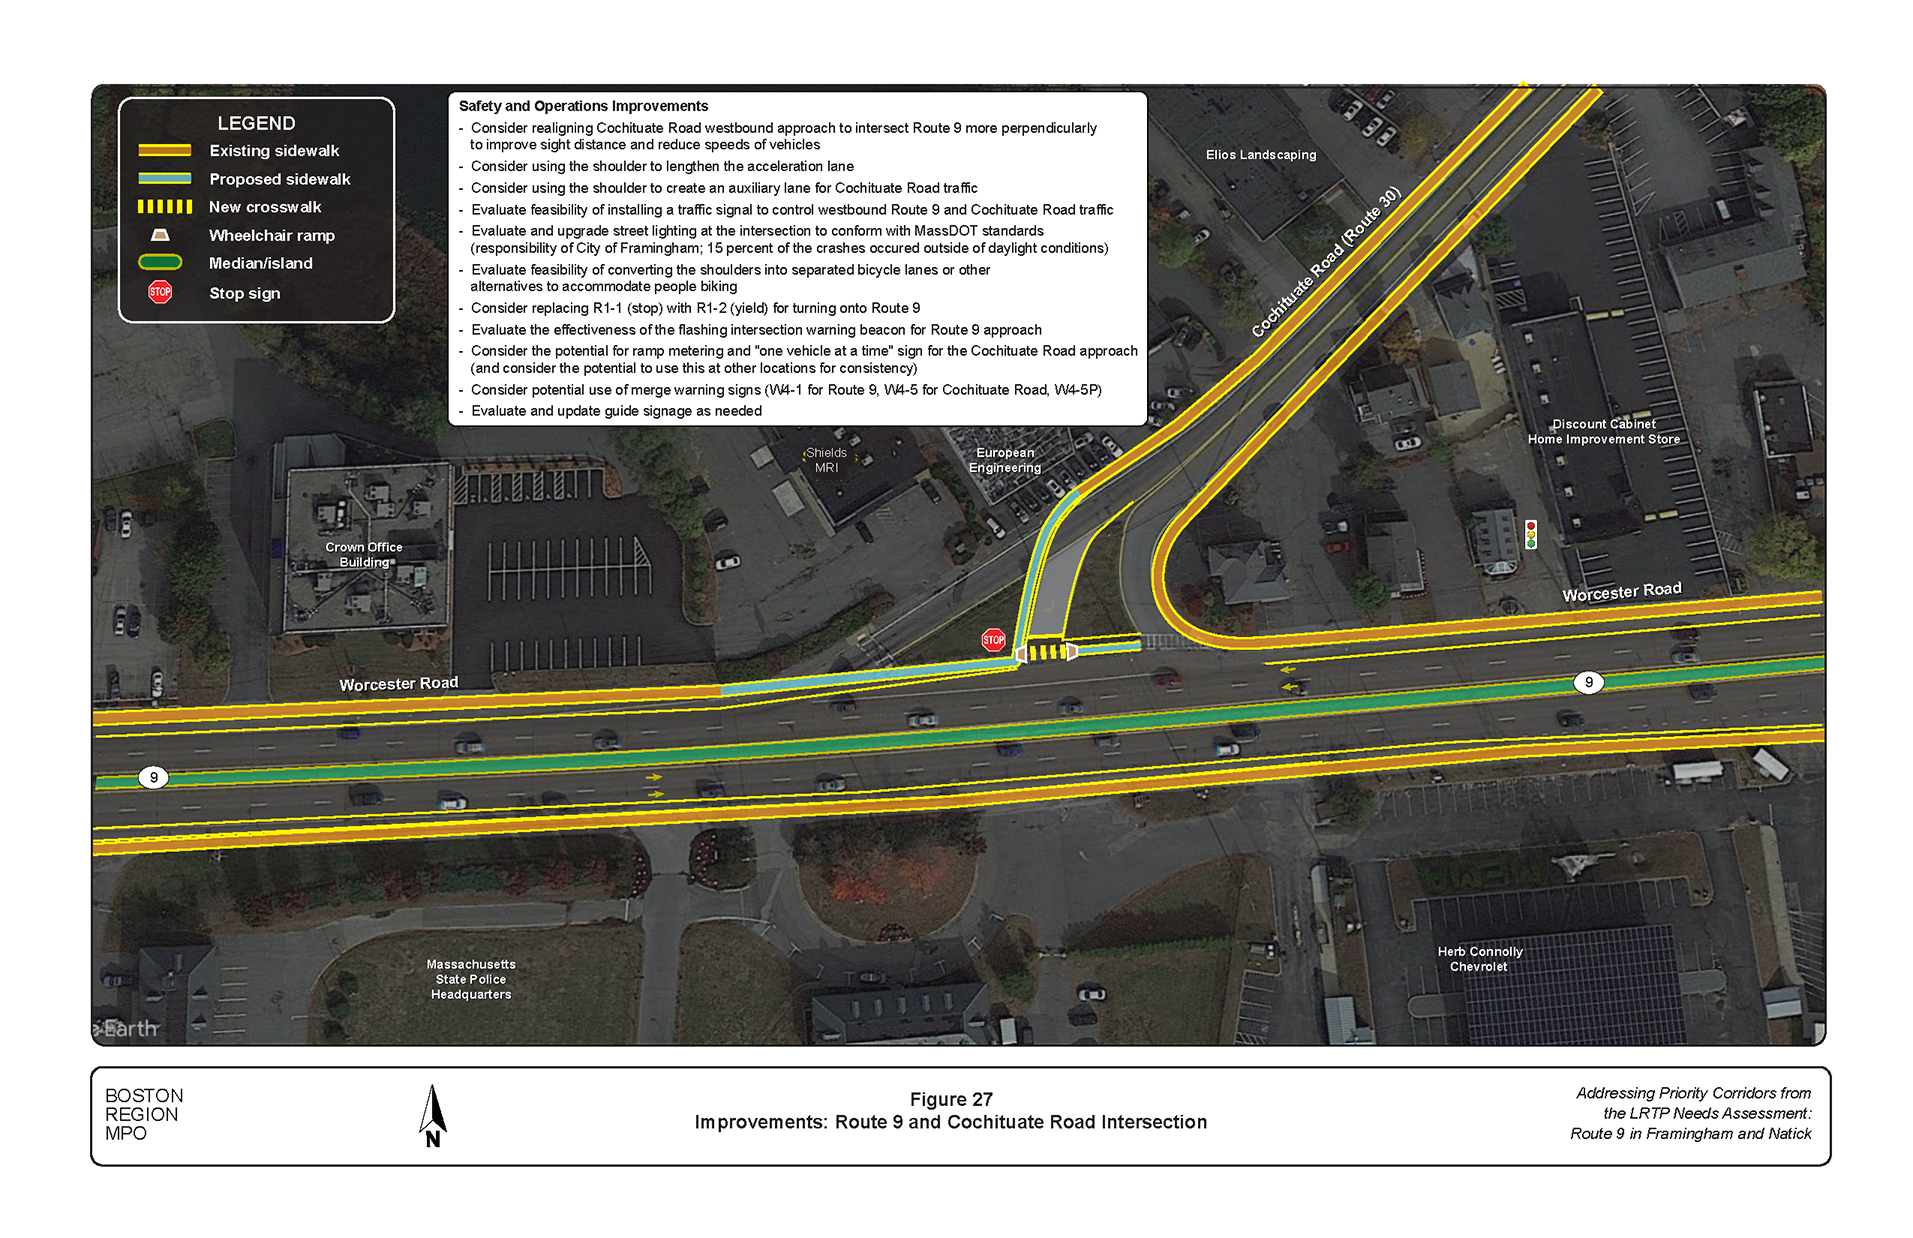 Figure 27 is an aerial photo showing the intersection of Route 9 and Cochituate Road and the improvements